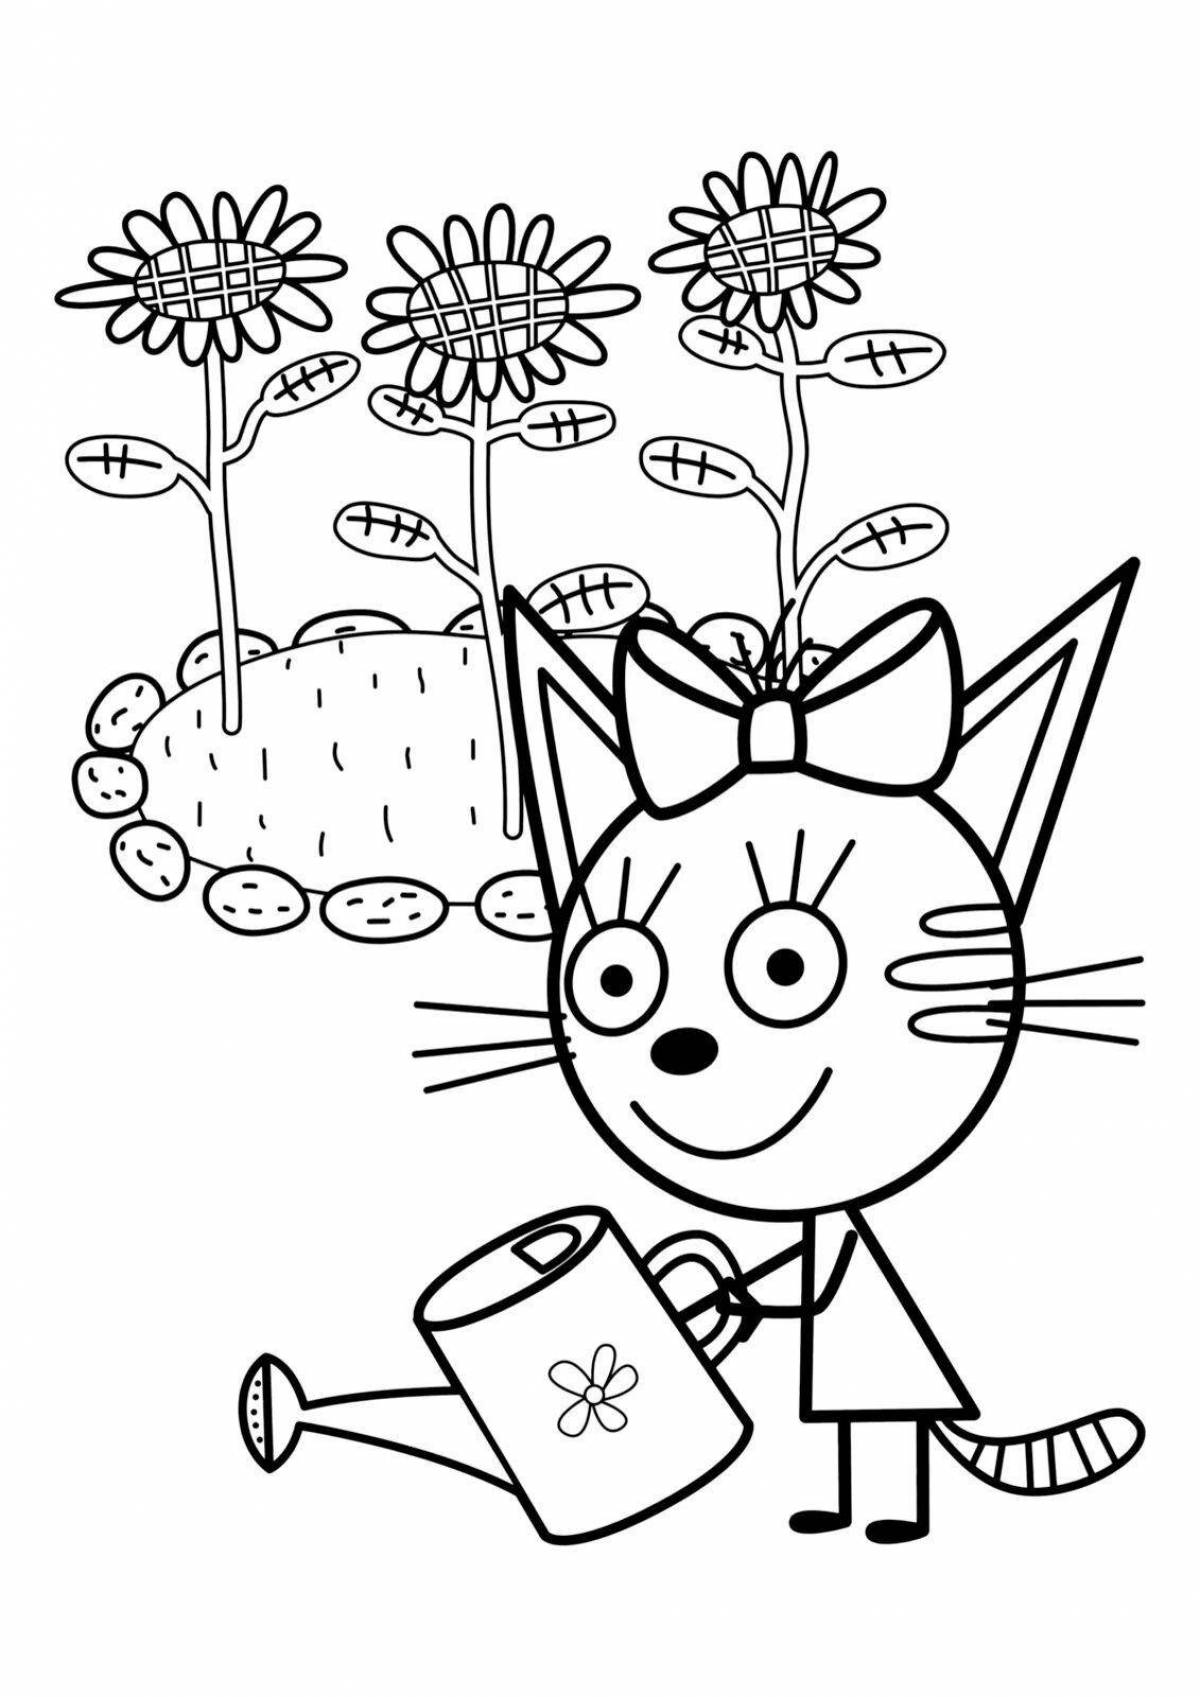 Colorific caramel coloring page for kids